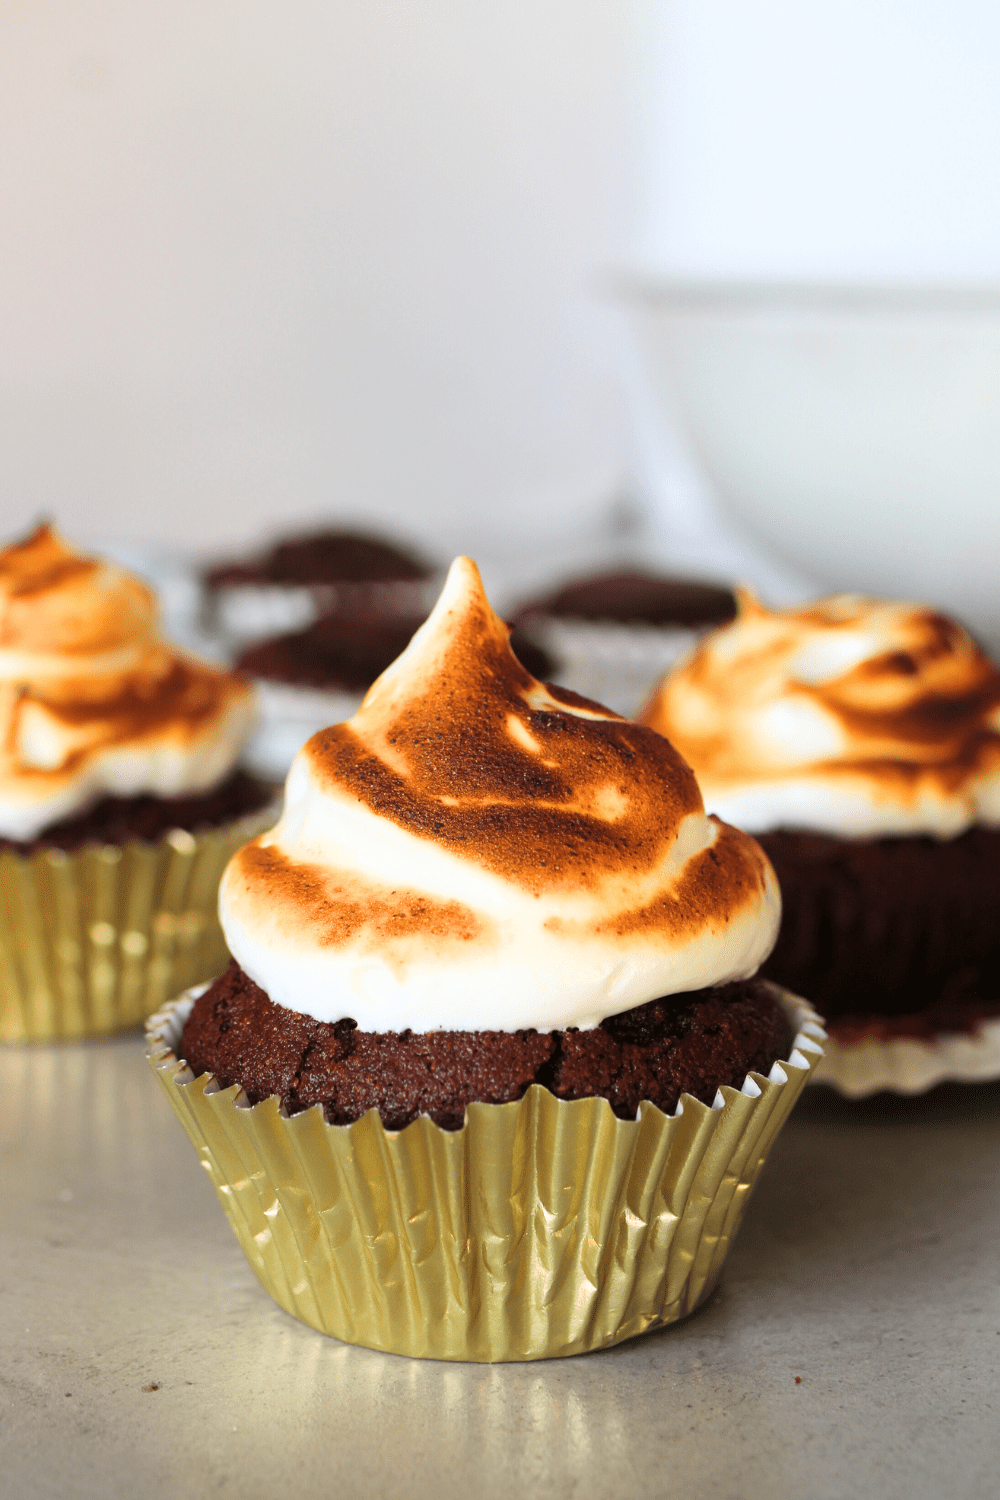 a keto chocolate cupcake topped with keto marshmallow fluff that has been roasted.